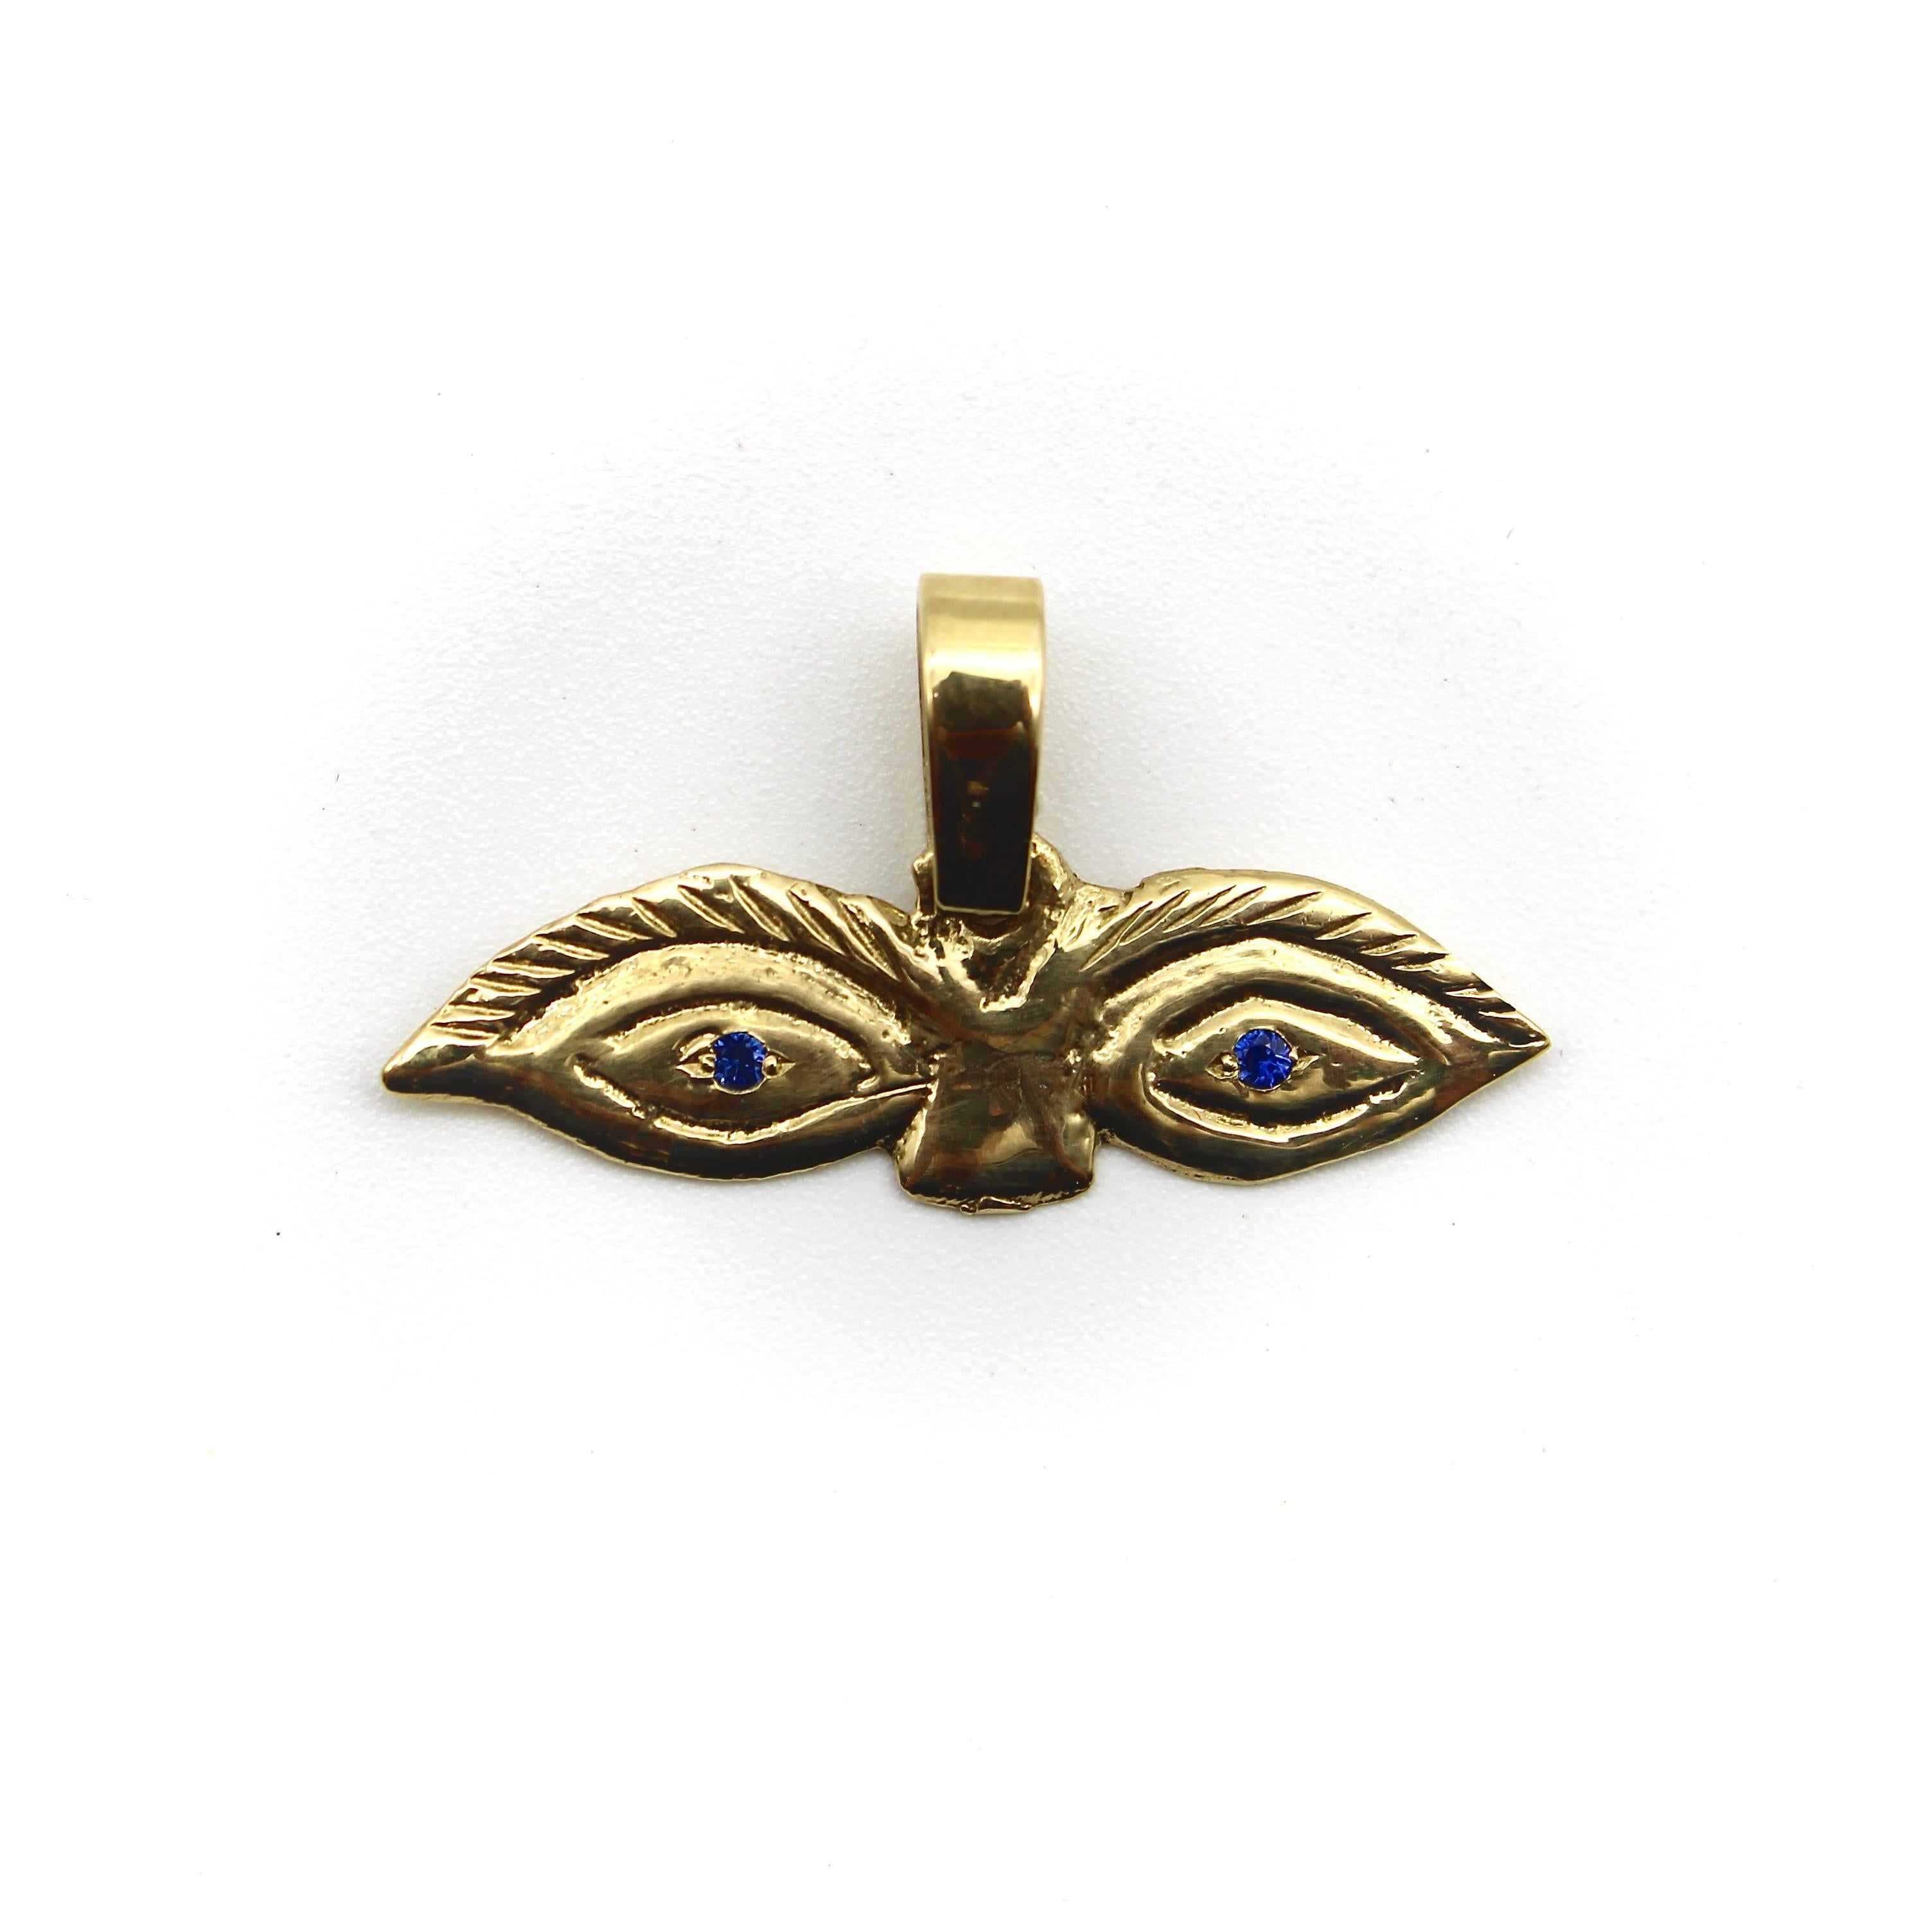 This Signature 14K gold eye charm is inspired by the Mexican religious Milagro the 